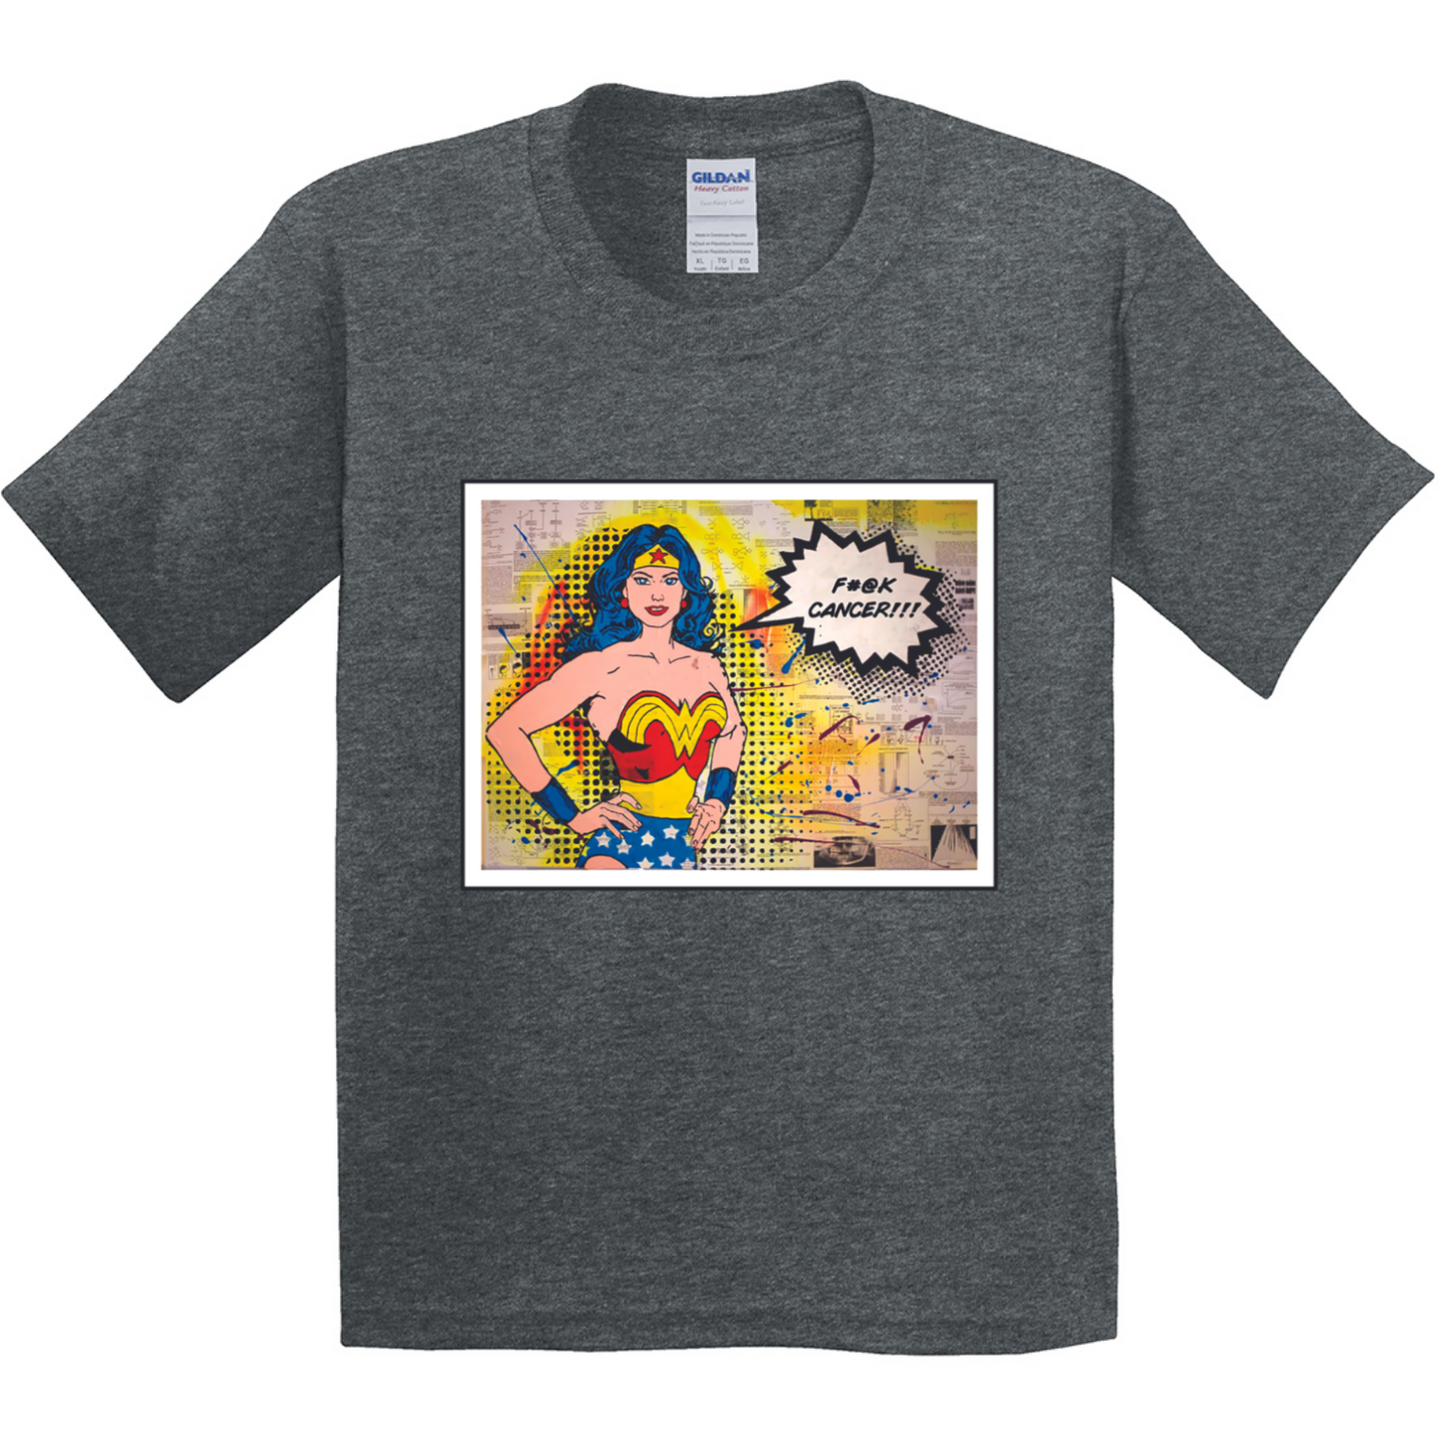 "Empowered" Youth Tee